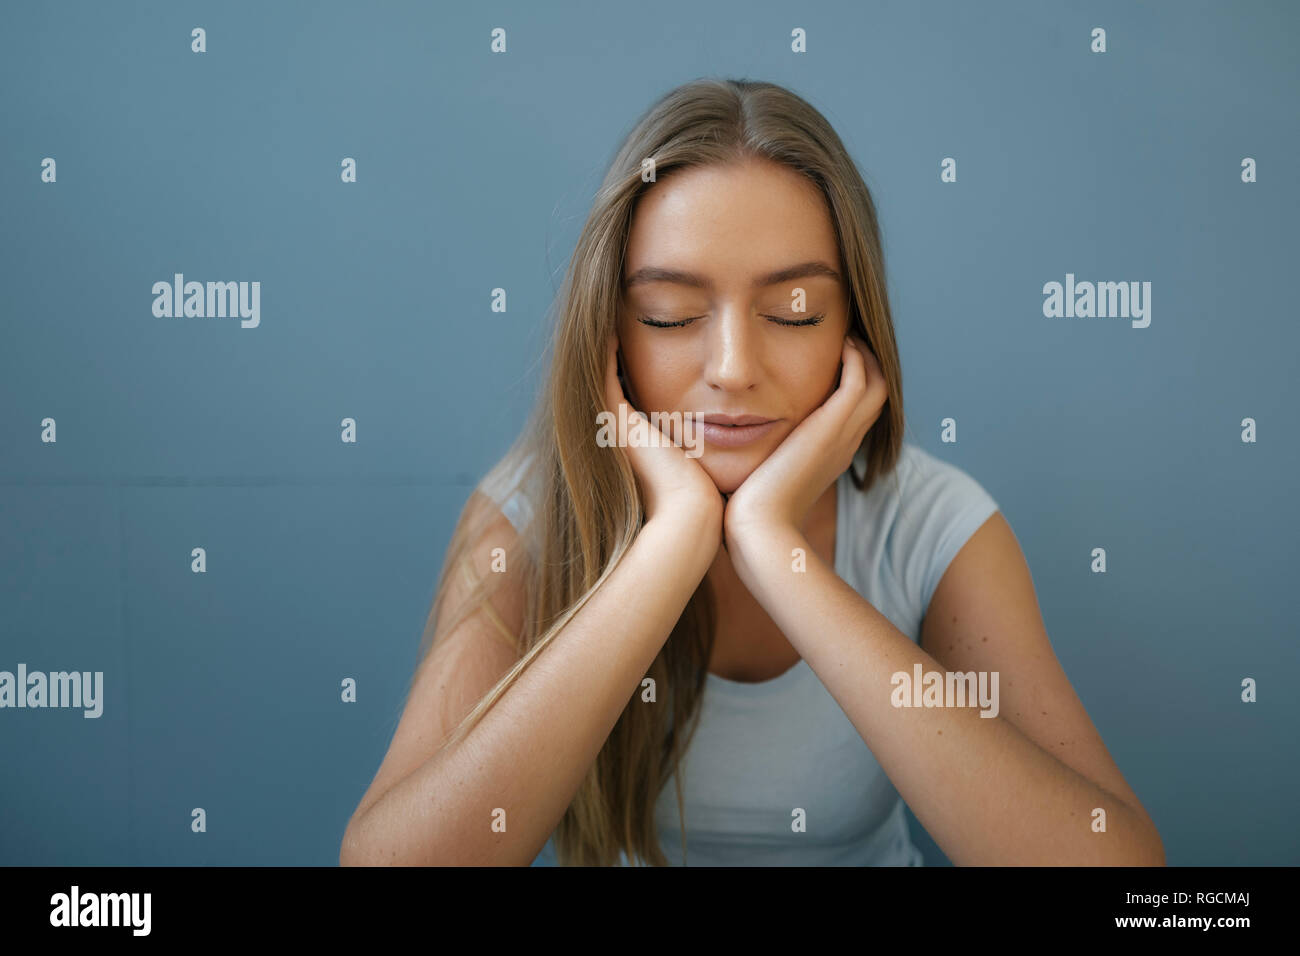 Portrait of young woman with eyes closed and head in hands relaxing Stock Photo